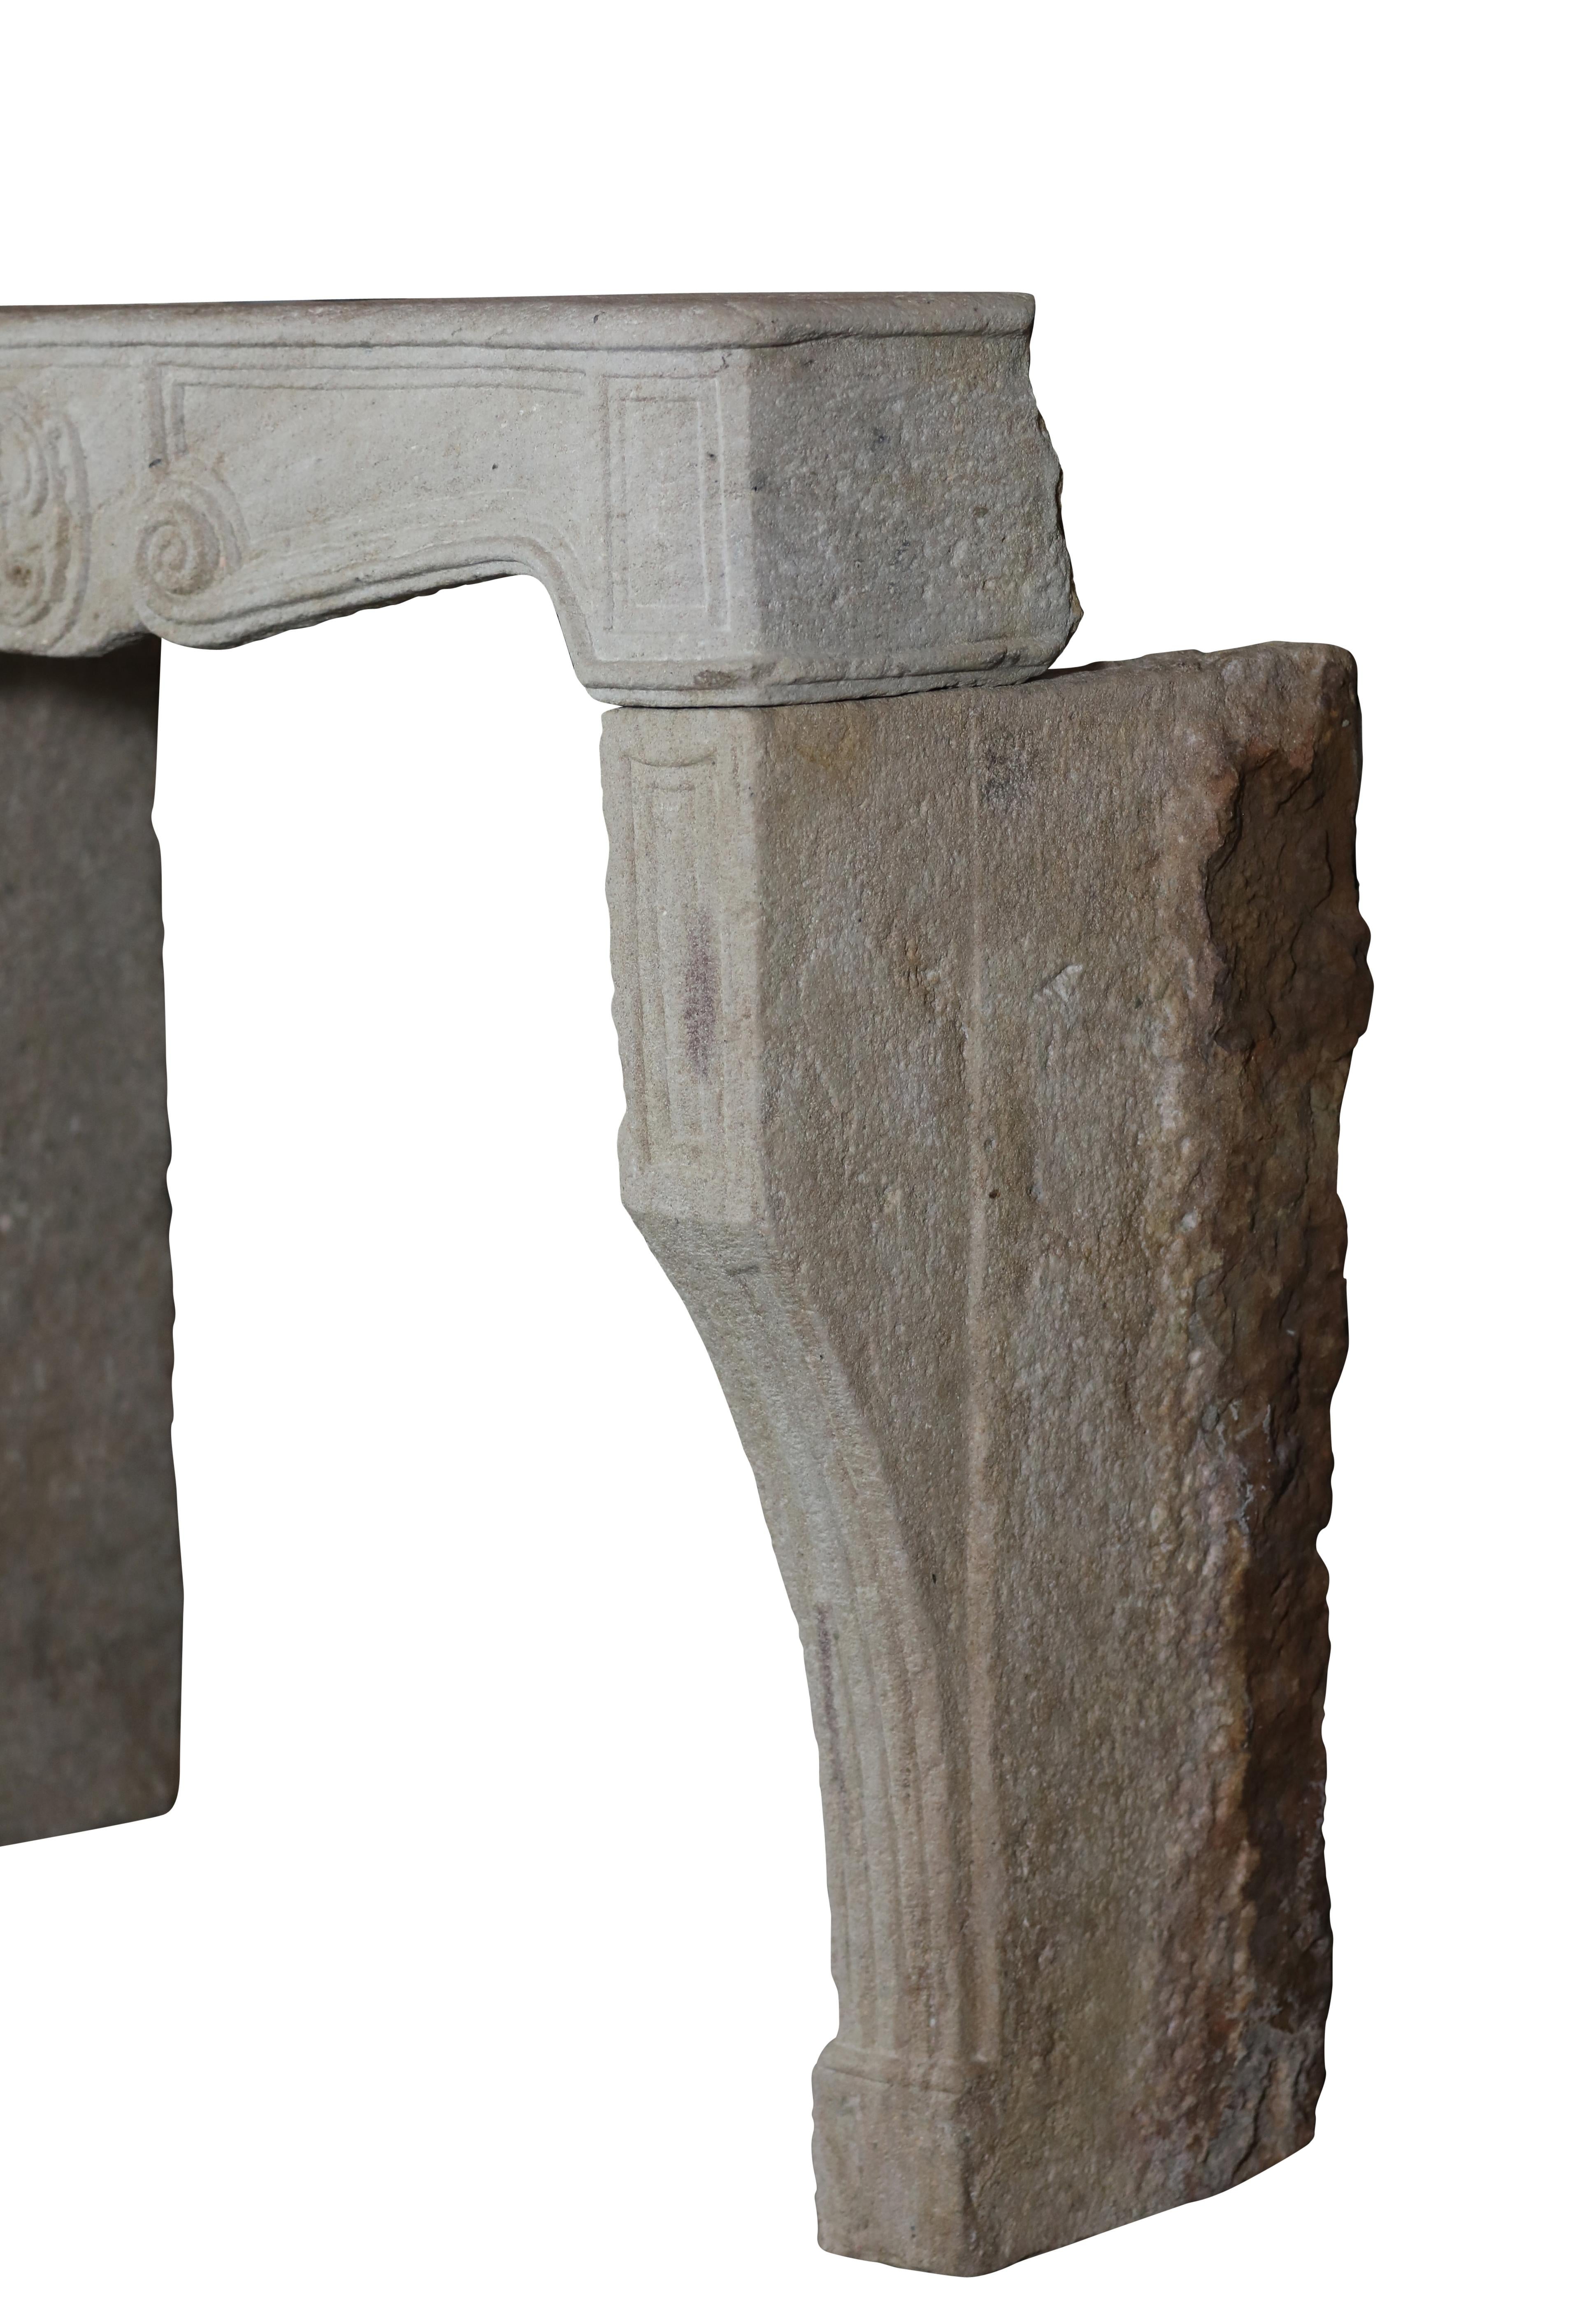 Hand-Carved Rustic Stone Fireplace Surround From France For Authentic Interior Creation For Sale